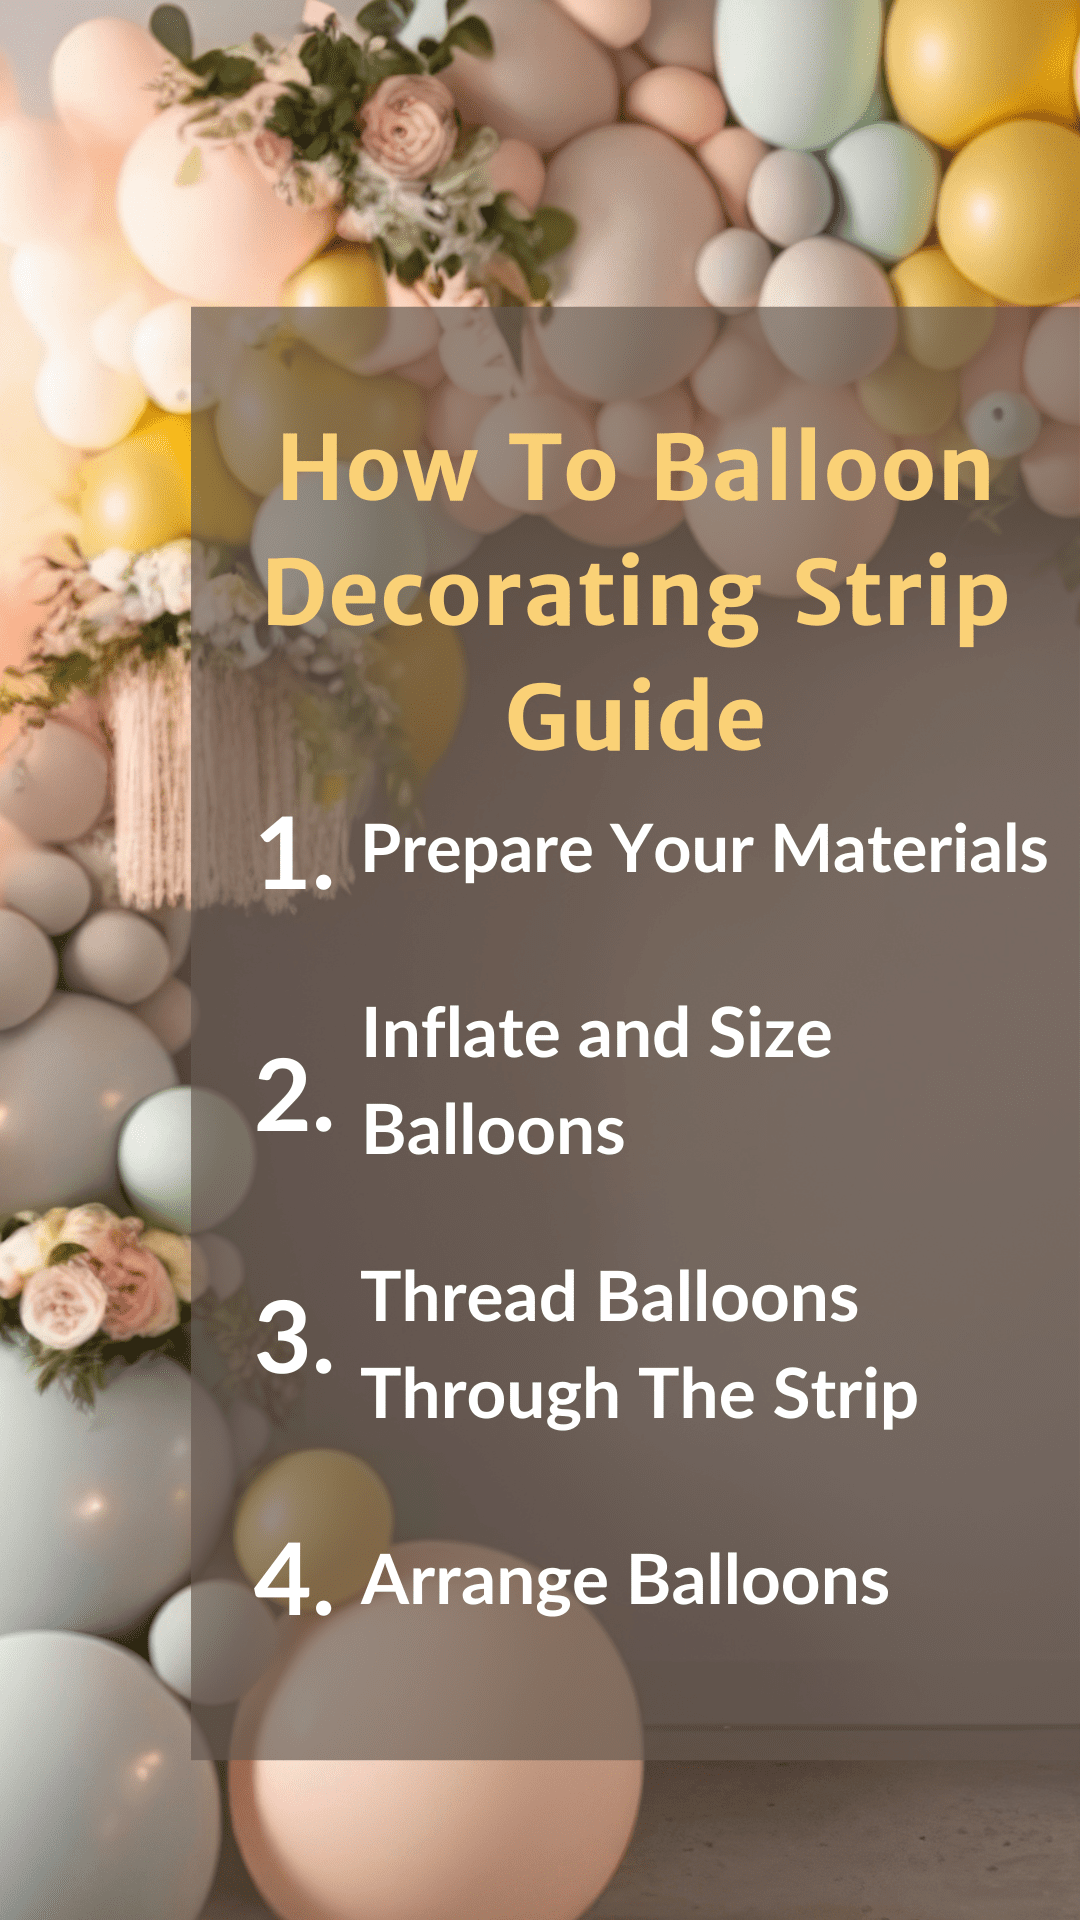 How To Balloon Decorating Strip Guide - Pinterest